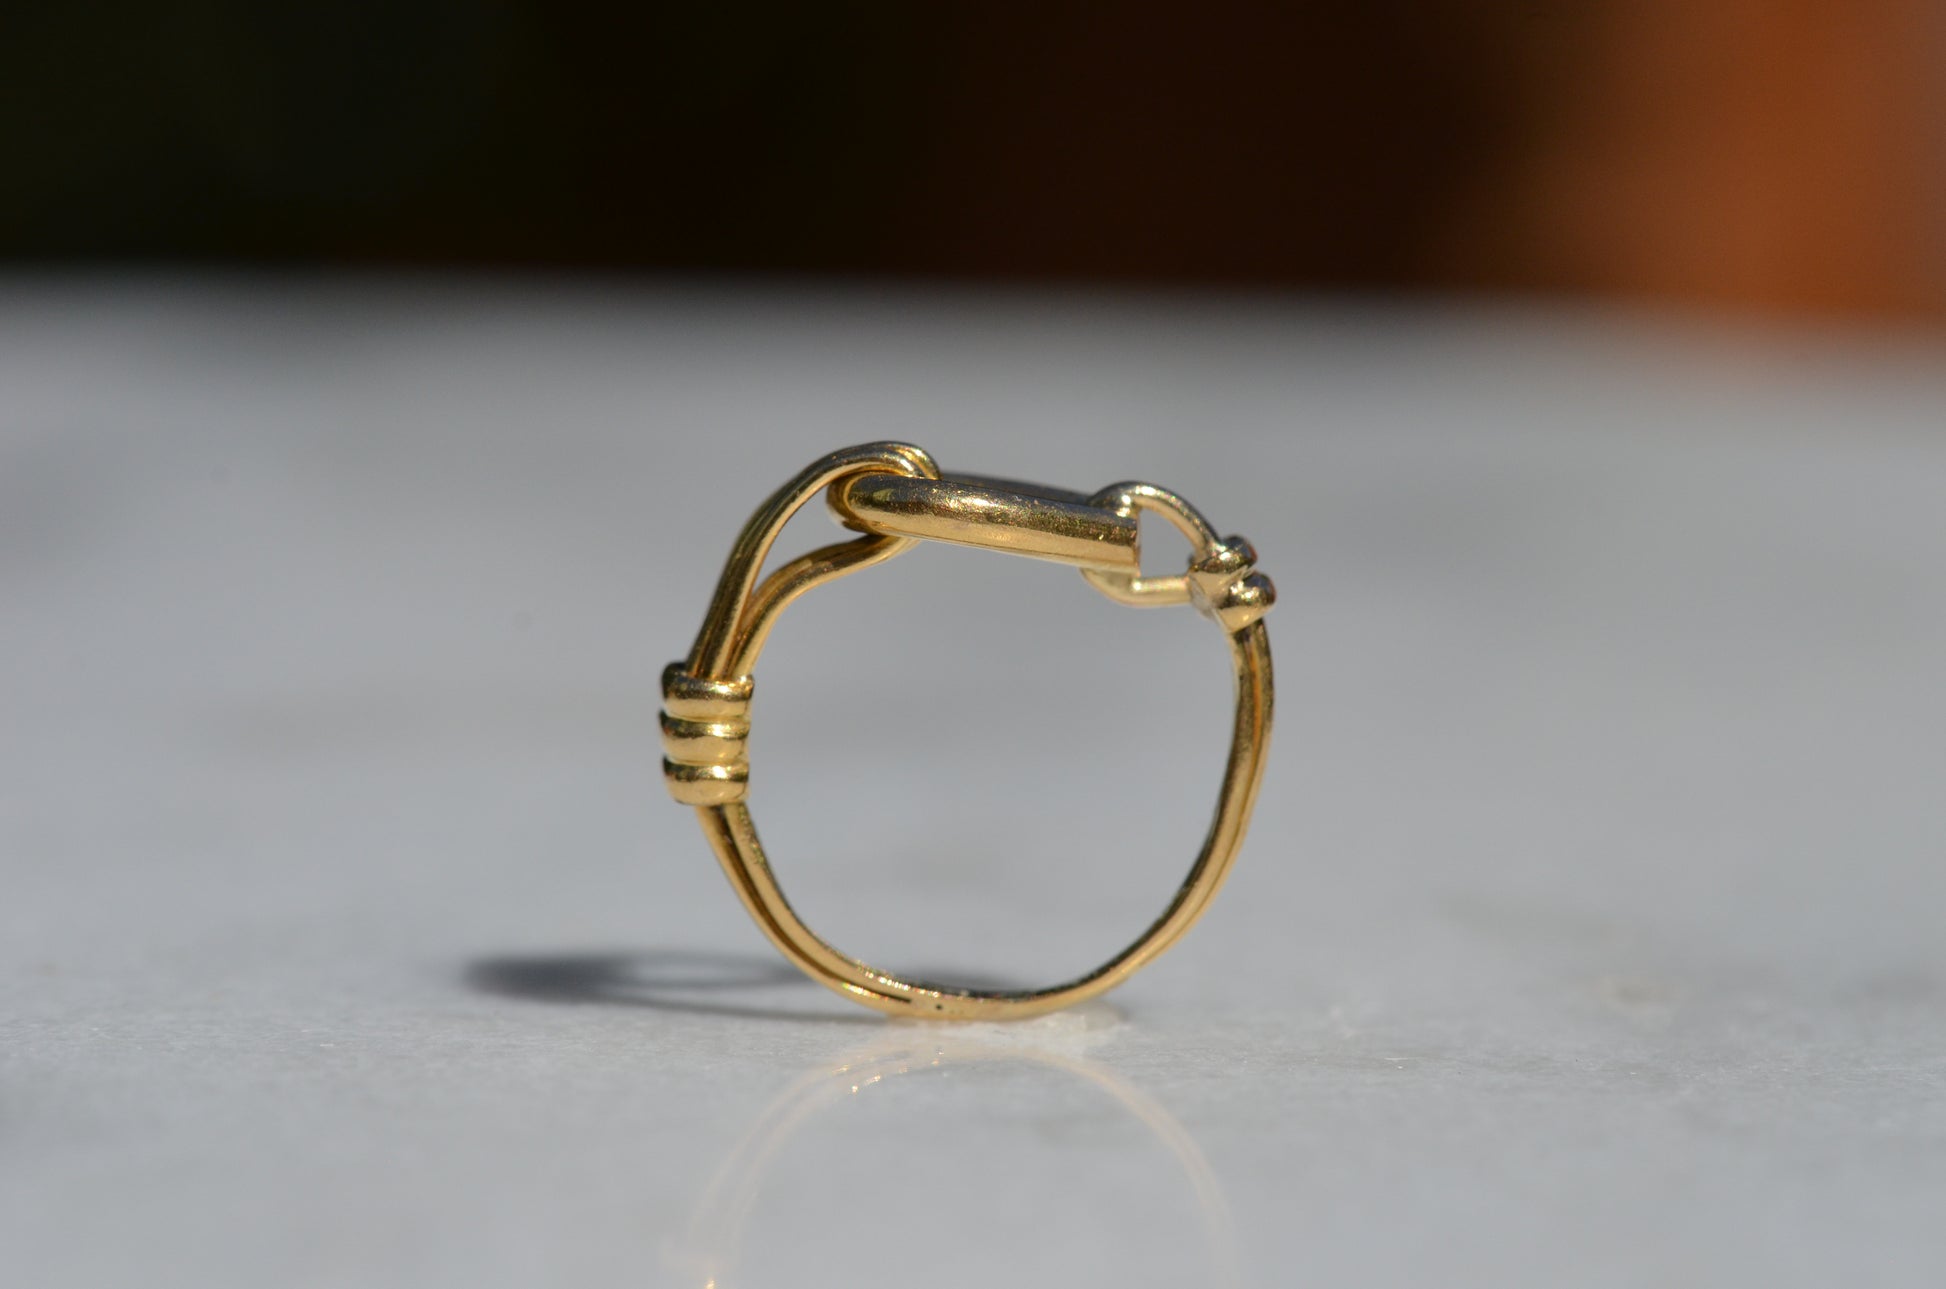 The ring is positioned upright and looking through the finger hole, further showcasing the asymmetric design and the flat top of the ring.